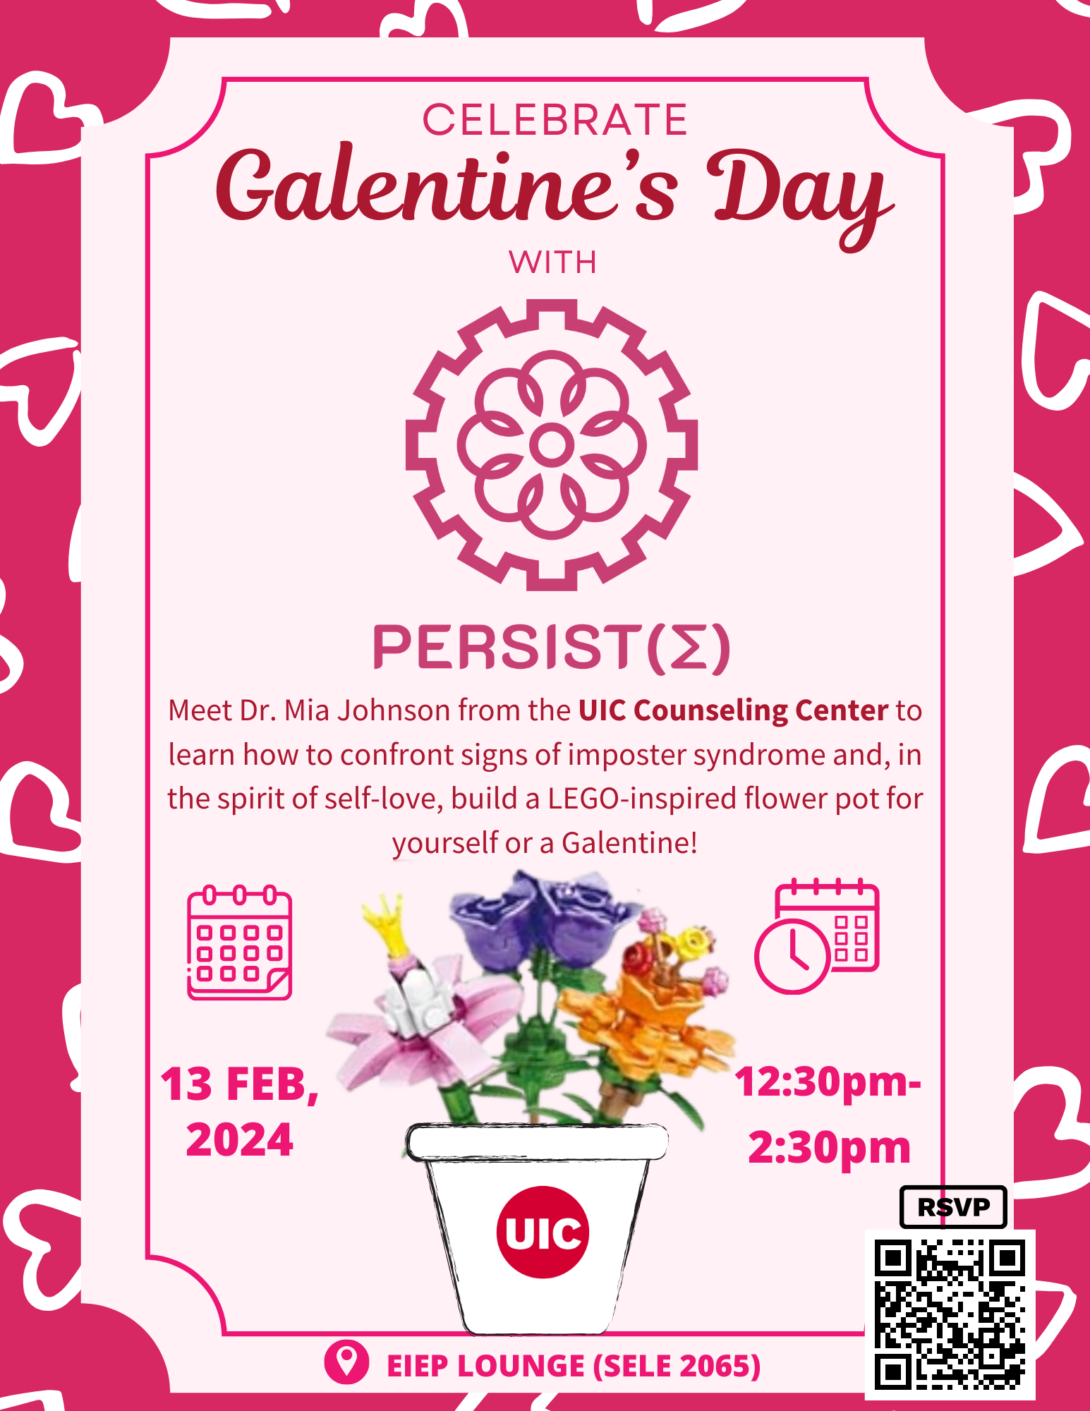 Details about the PERSIST(Σ) Galentine's Day event (same text on this page) in magenta text on a pink background. Below the title is the PERSIST(Σ) logo, a stylized gear. At the bottom is pot of flowers made with LEGO.